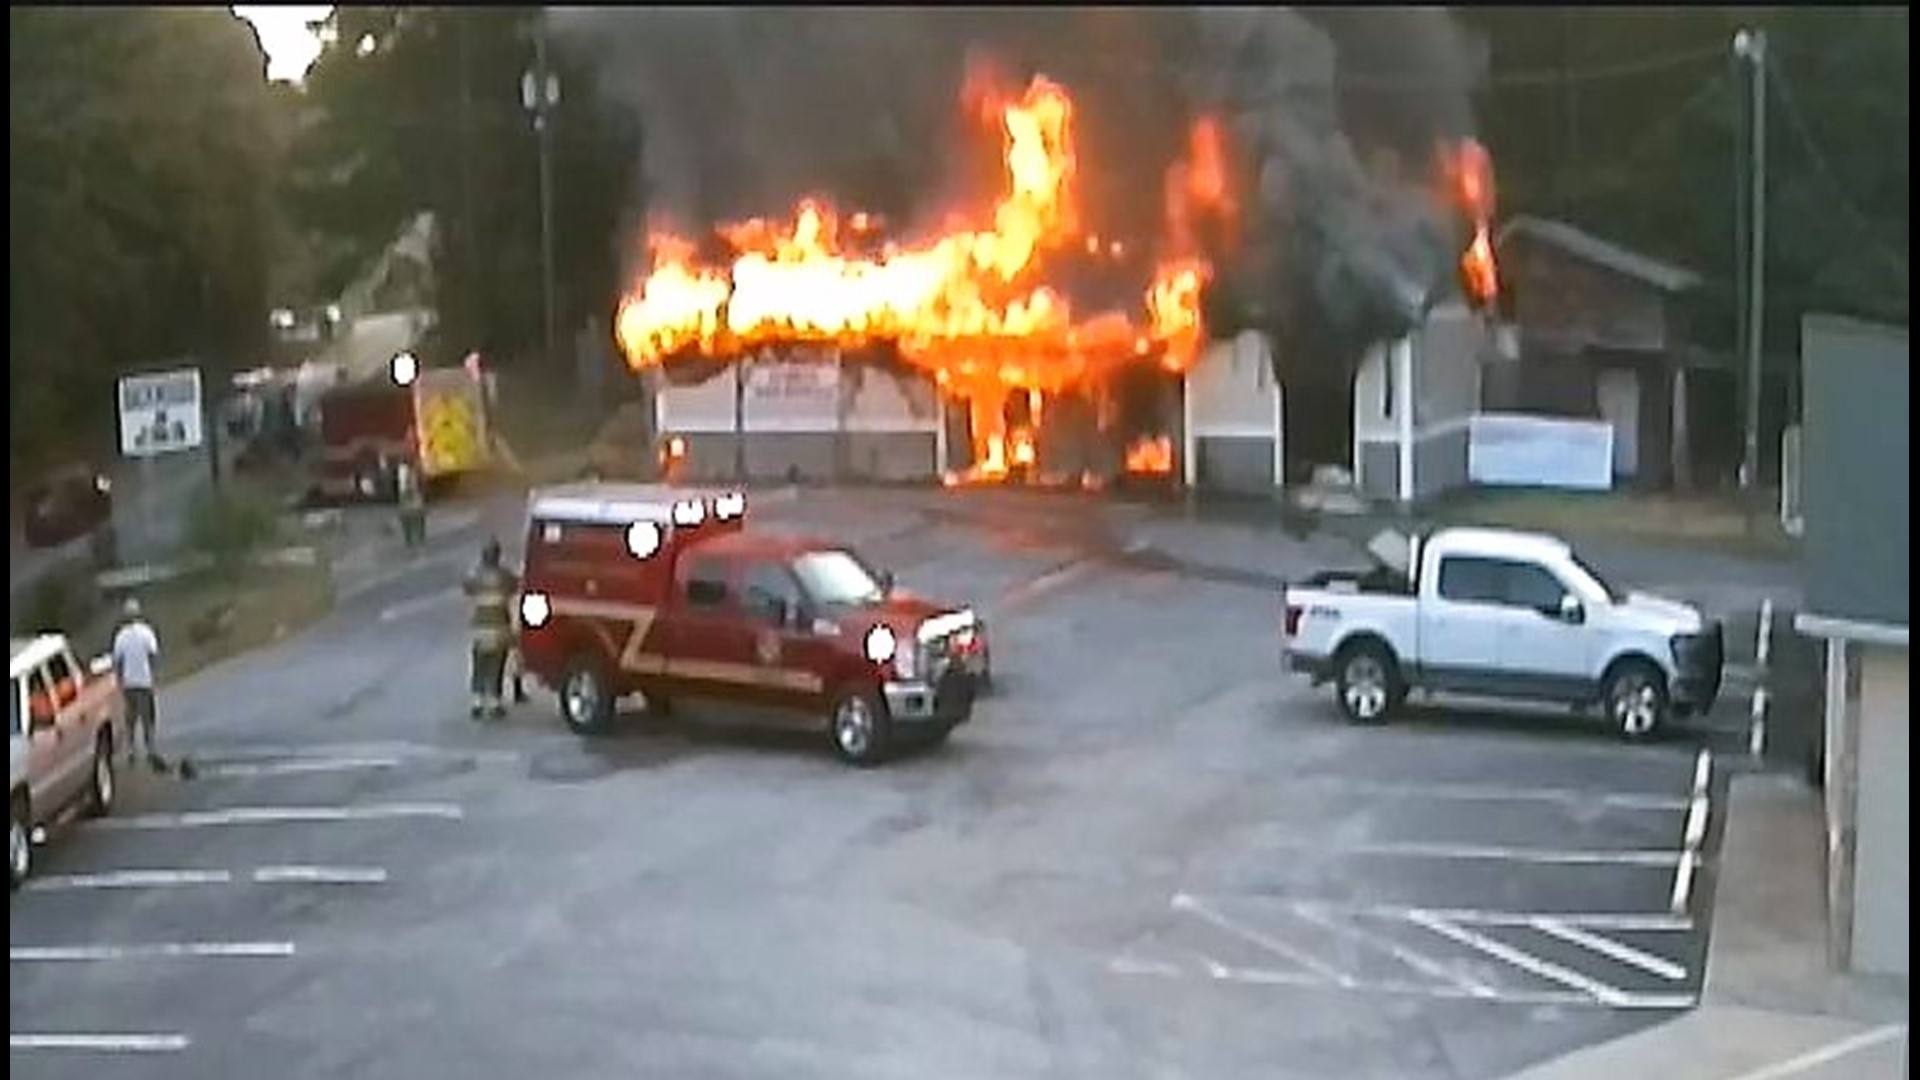 Investigators say the fire that destroyed the Backwoods Bar and Grill on High Falls Road on Oct. 1 was arson